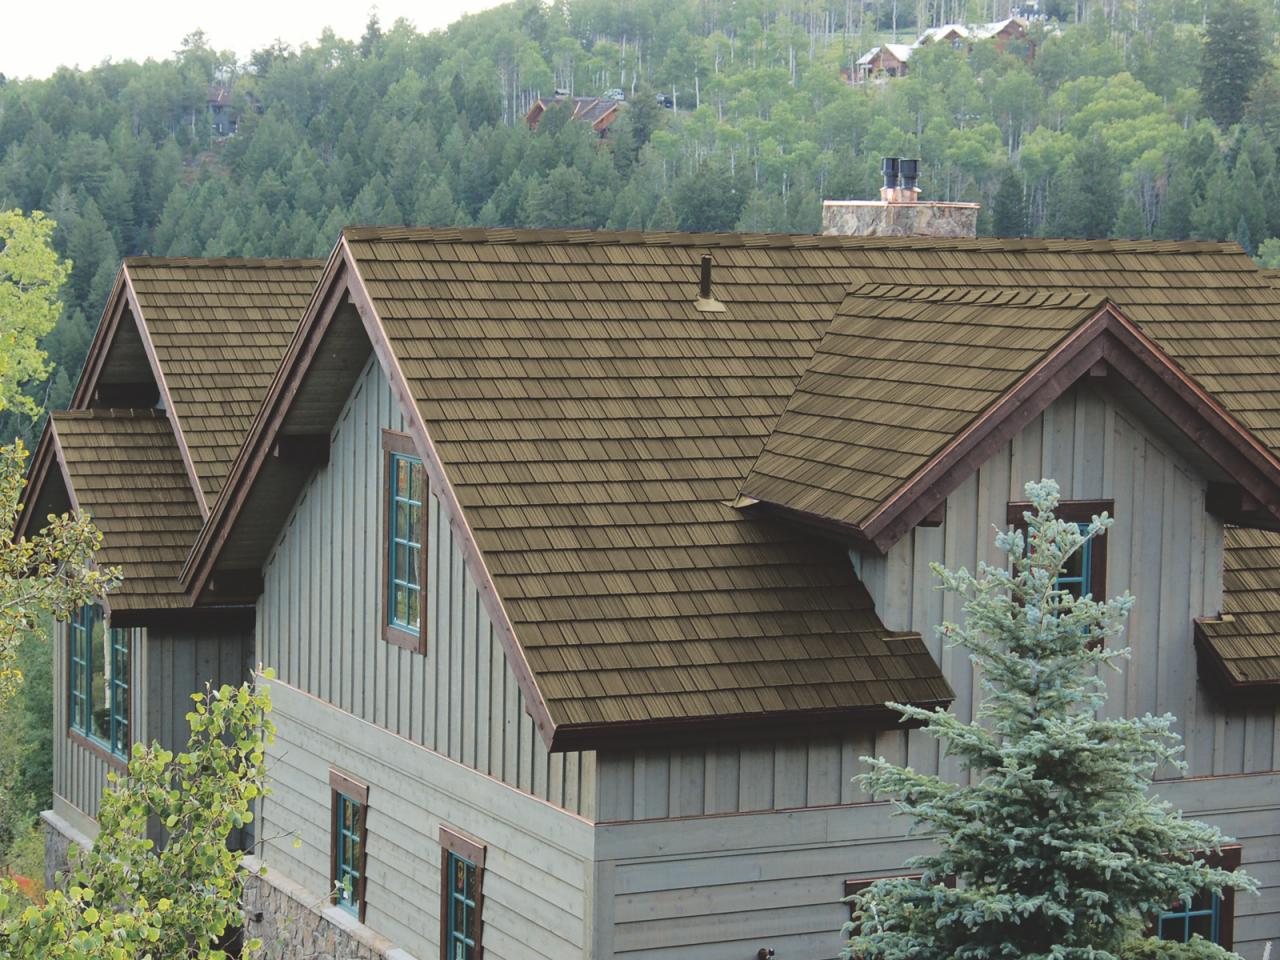 Types Of Roofing To Choose From